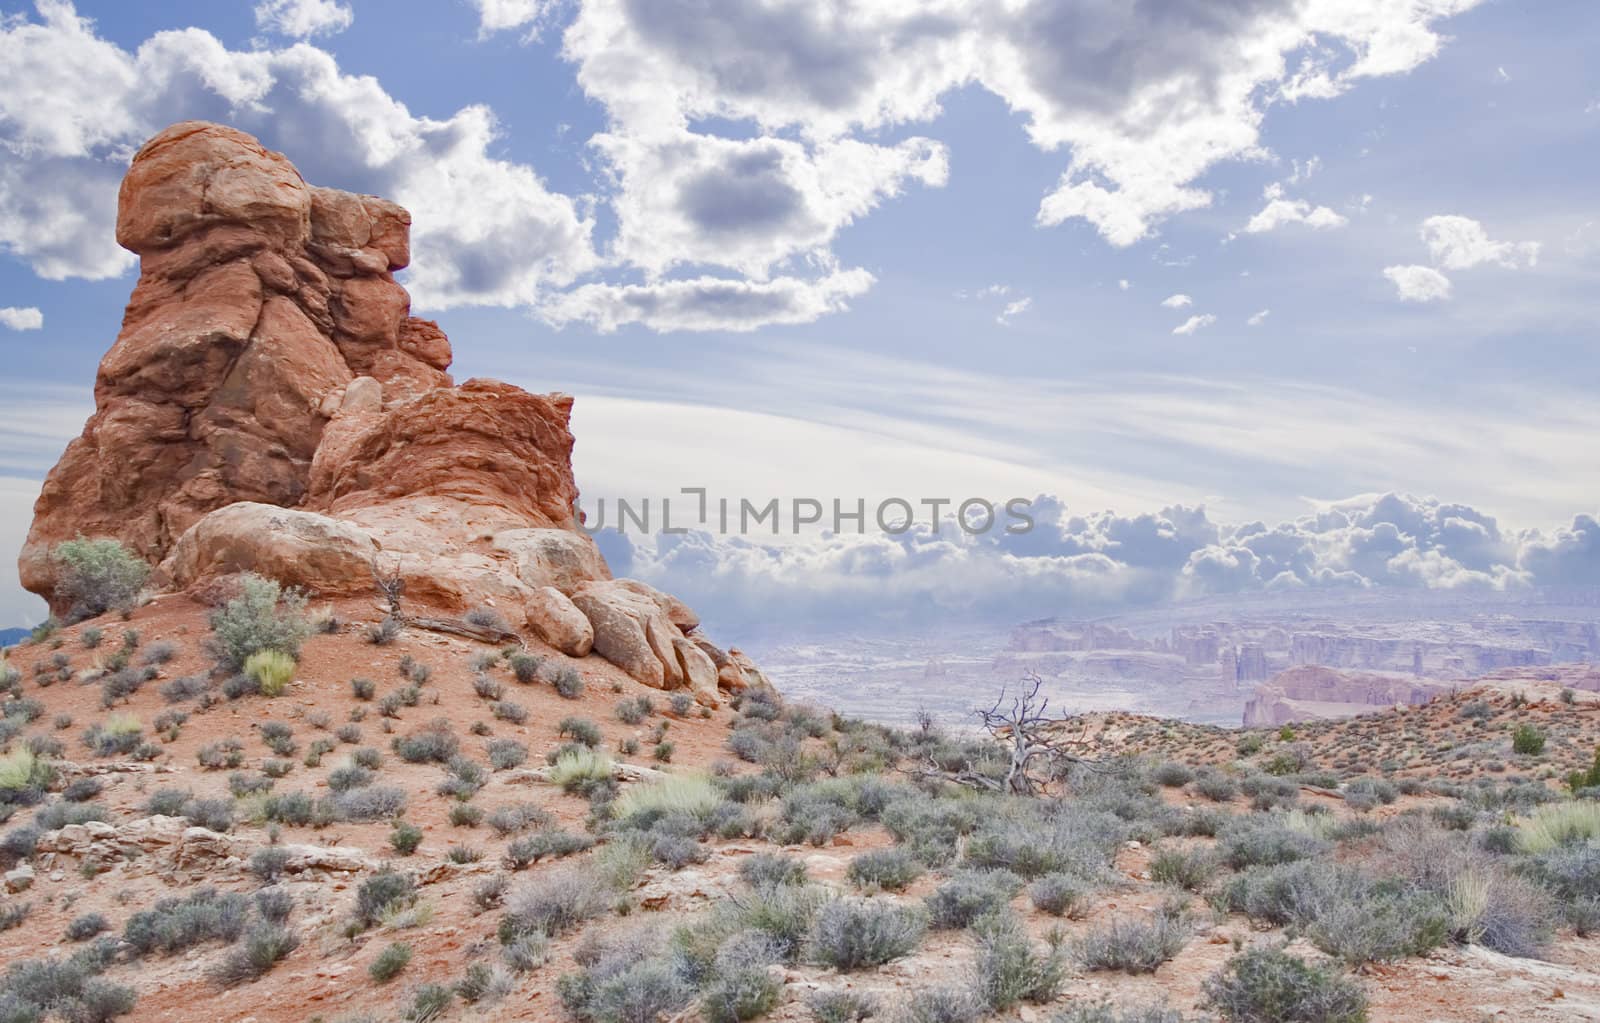 Arches National Park area mountains and spires in Utah USA